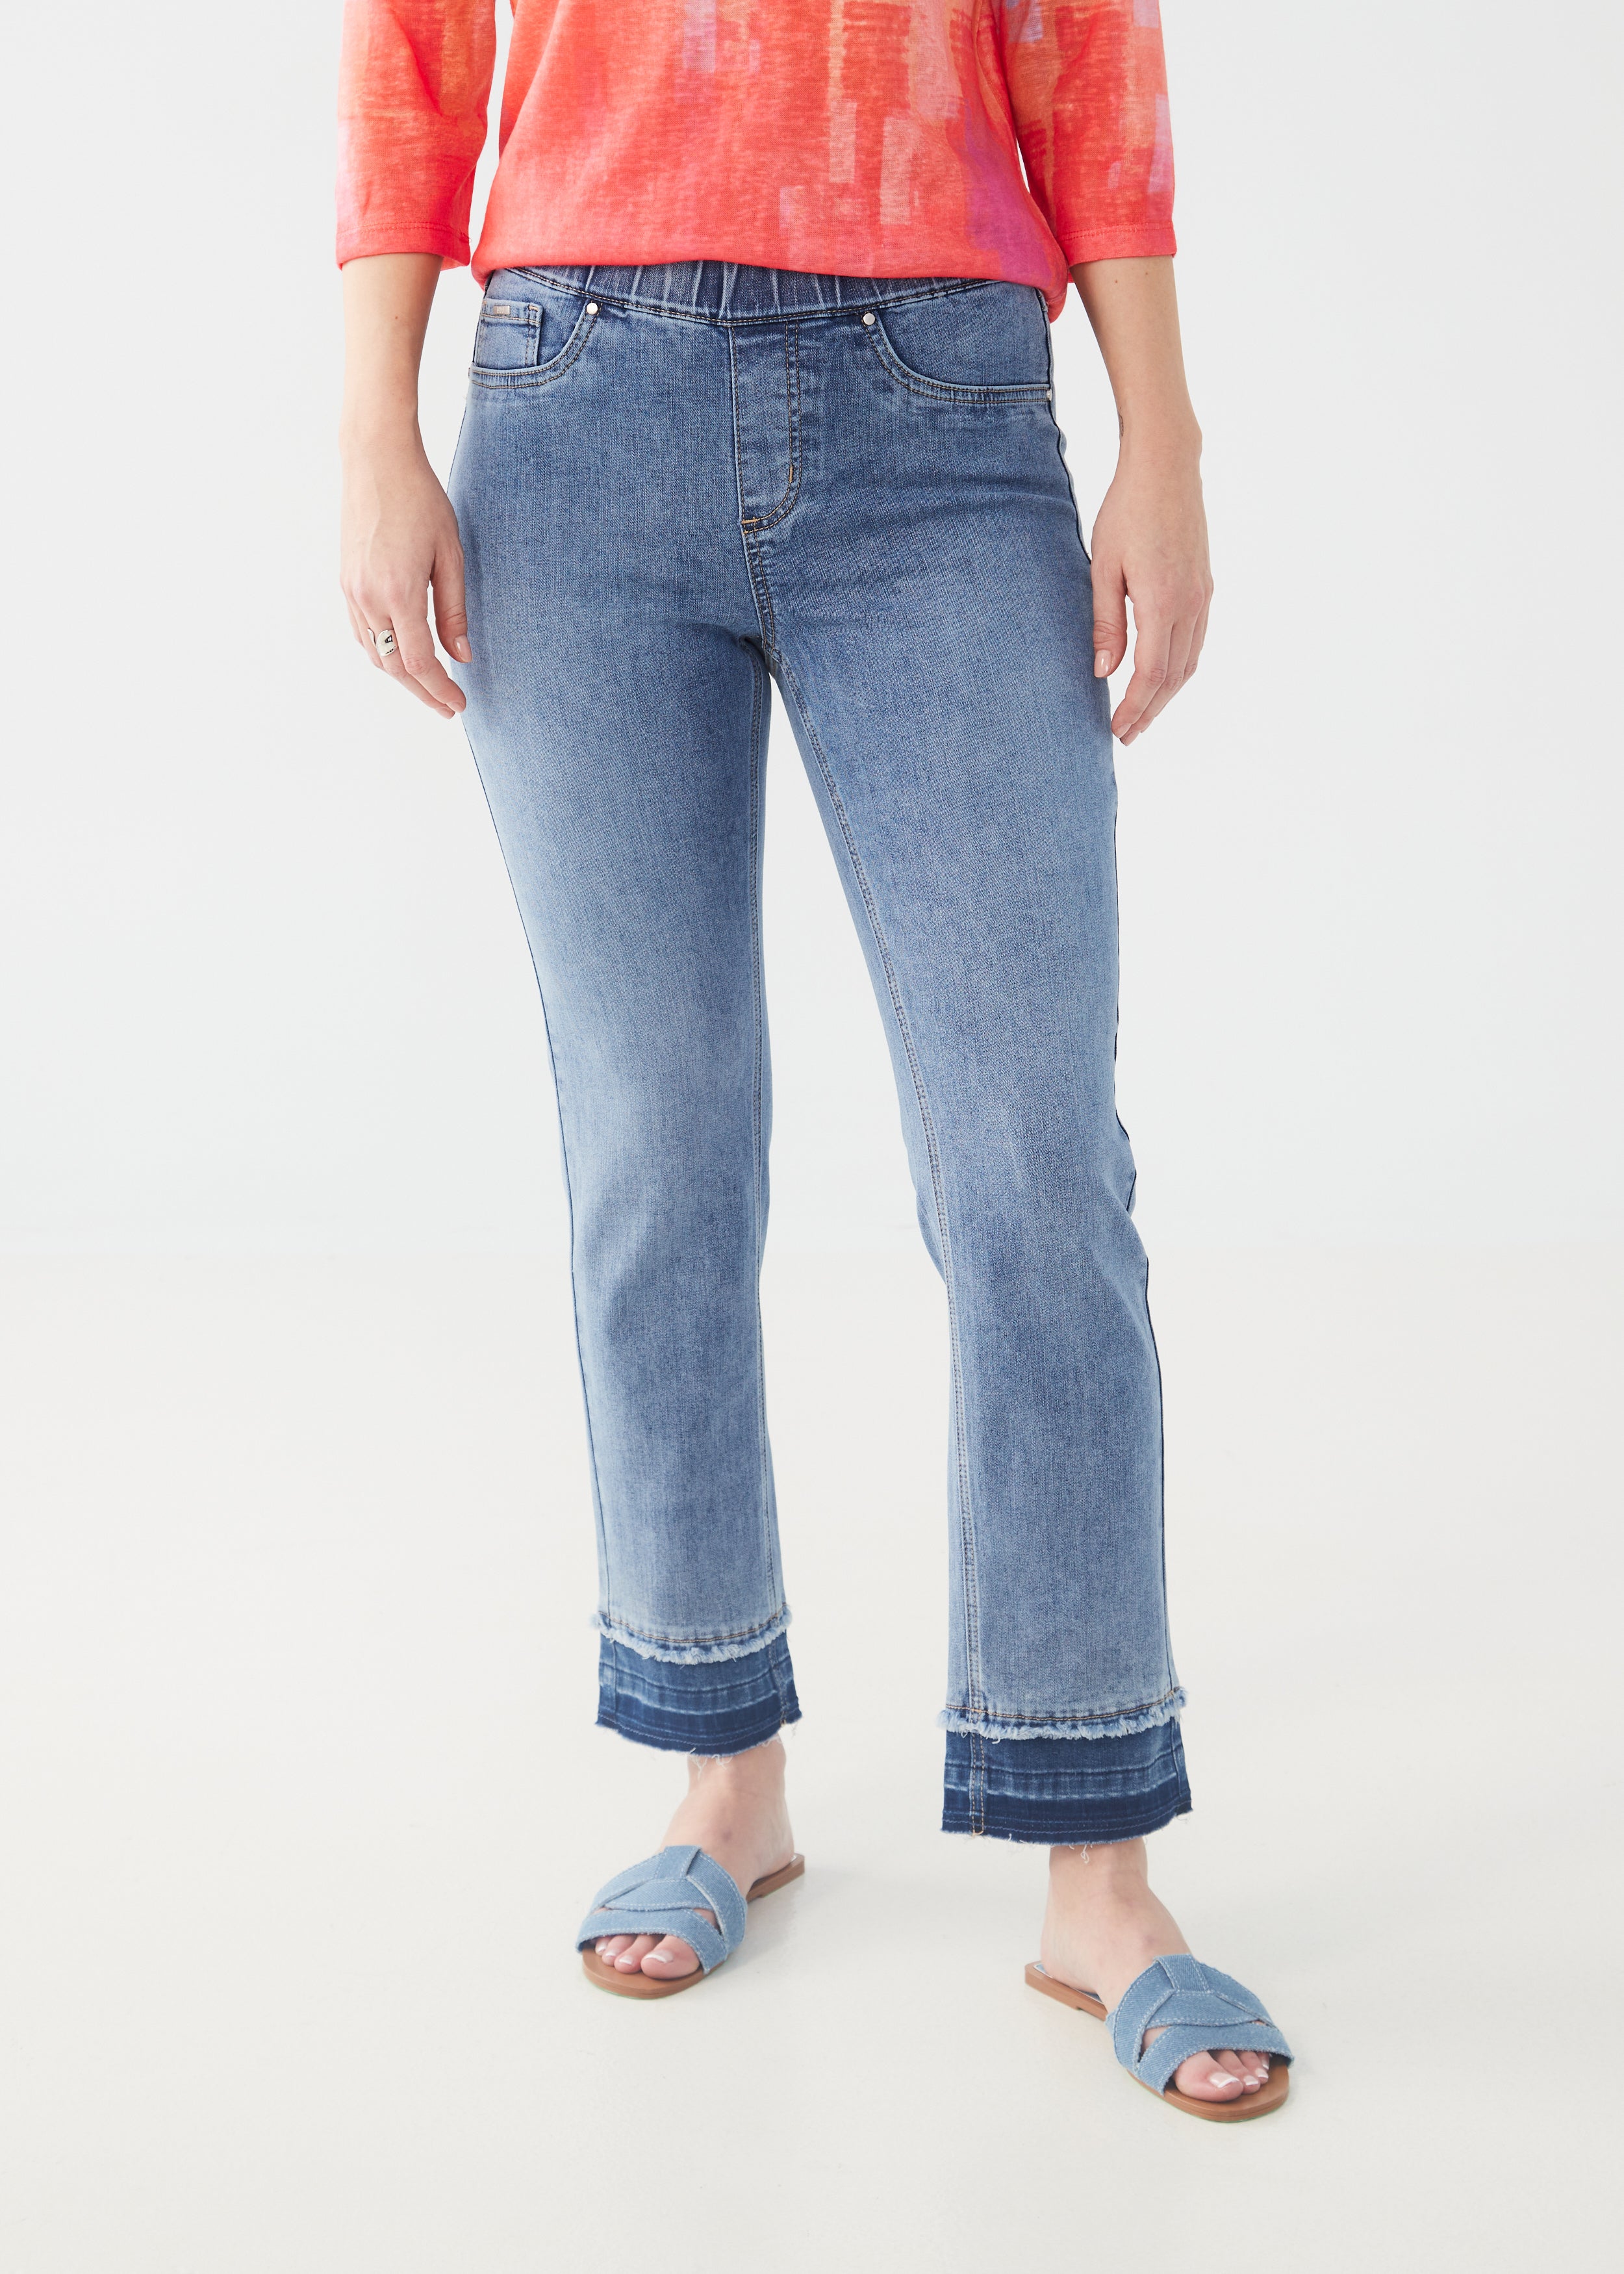 Pull-on Pencil Ankle Jean by FDJ